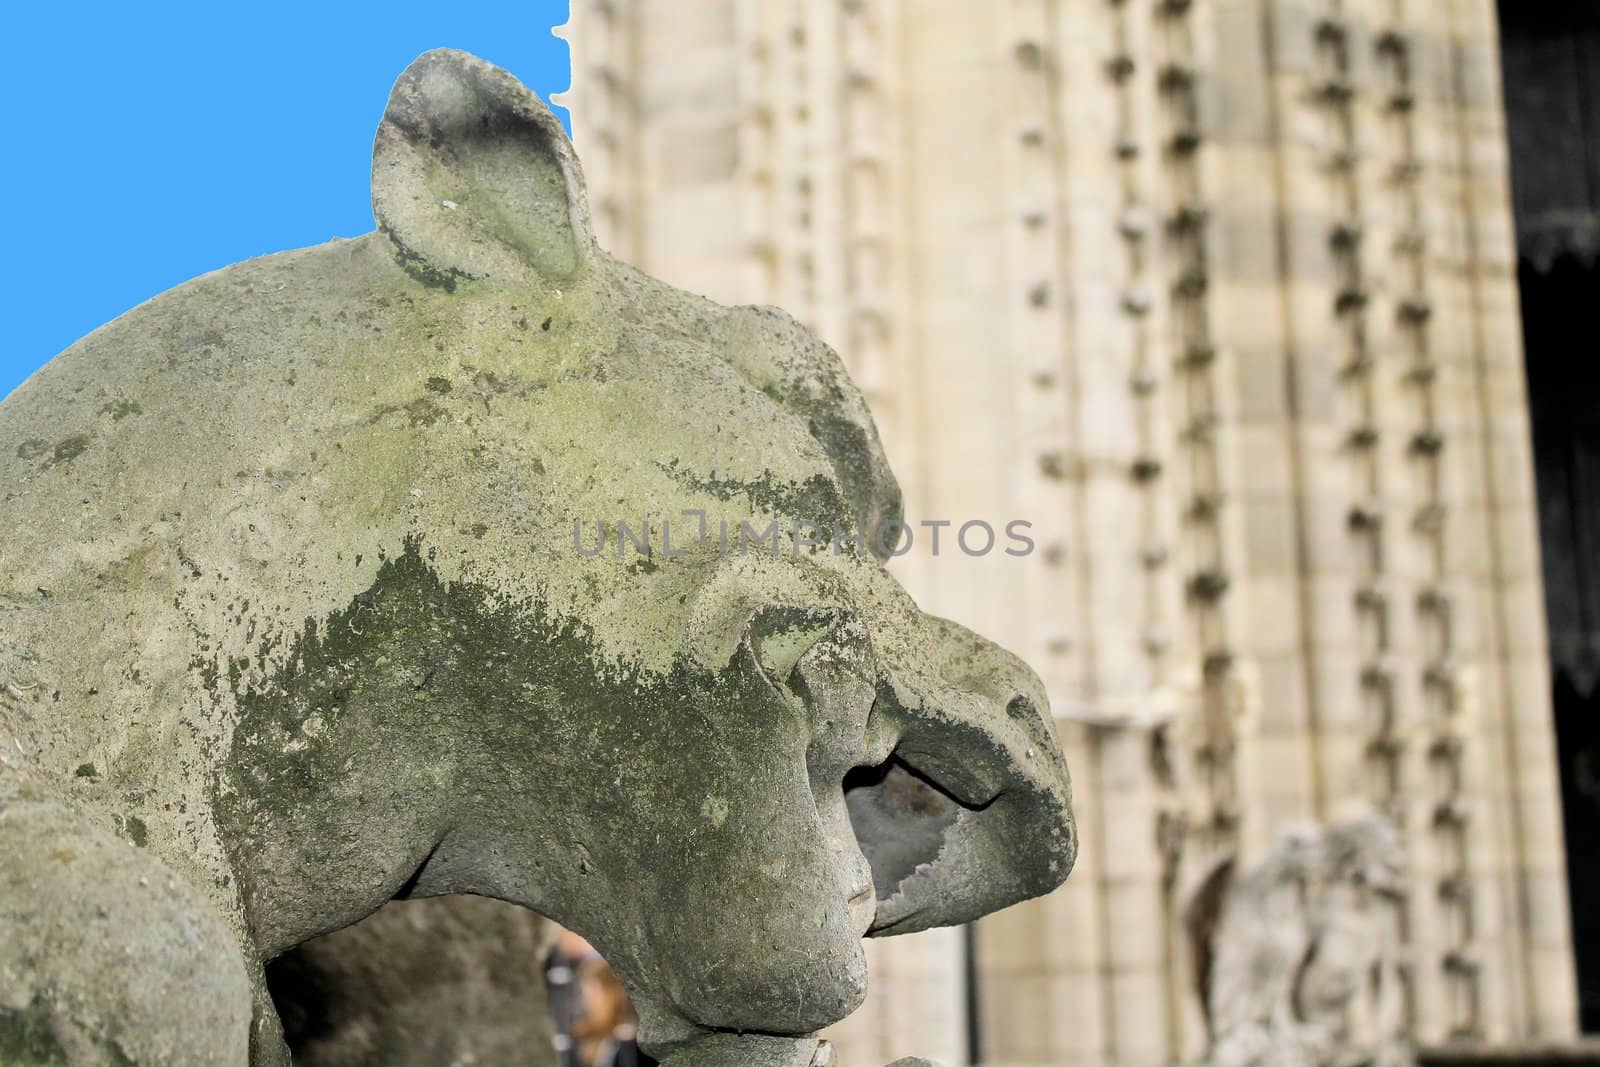 Gargoyle or chimera on the Cathedral of Notre Dame de Paris looks at the Eiffel Tower, Paris, France. Gargoyles are the Gothic landmarks in Paris. Vintage skyline of Paris with an old demon statue.